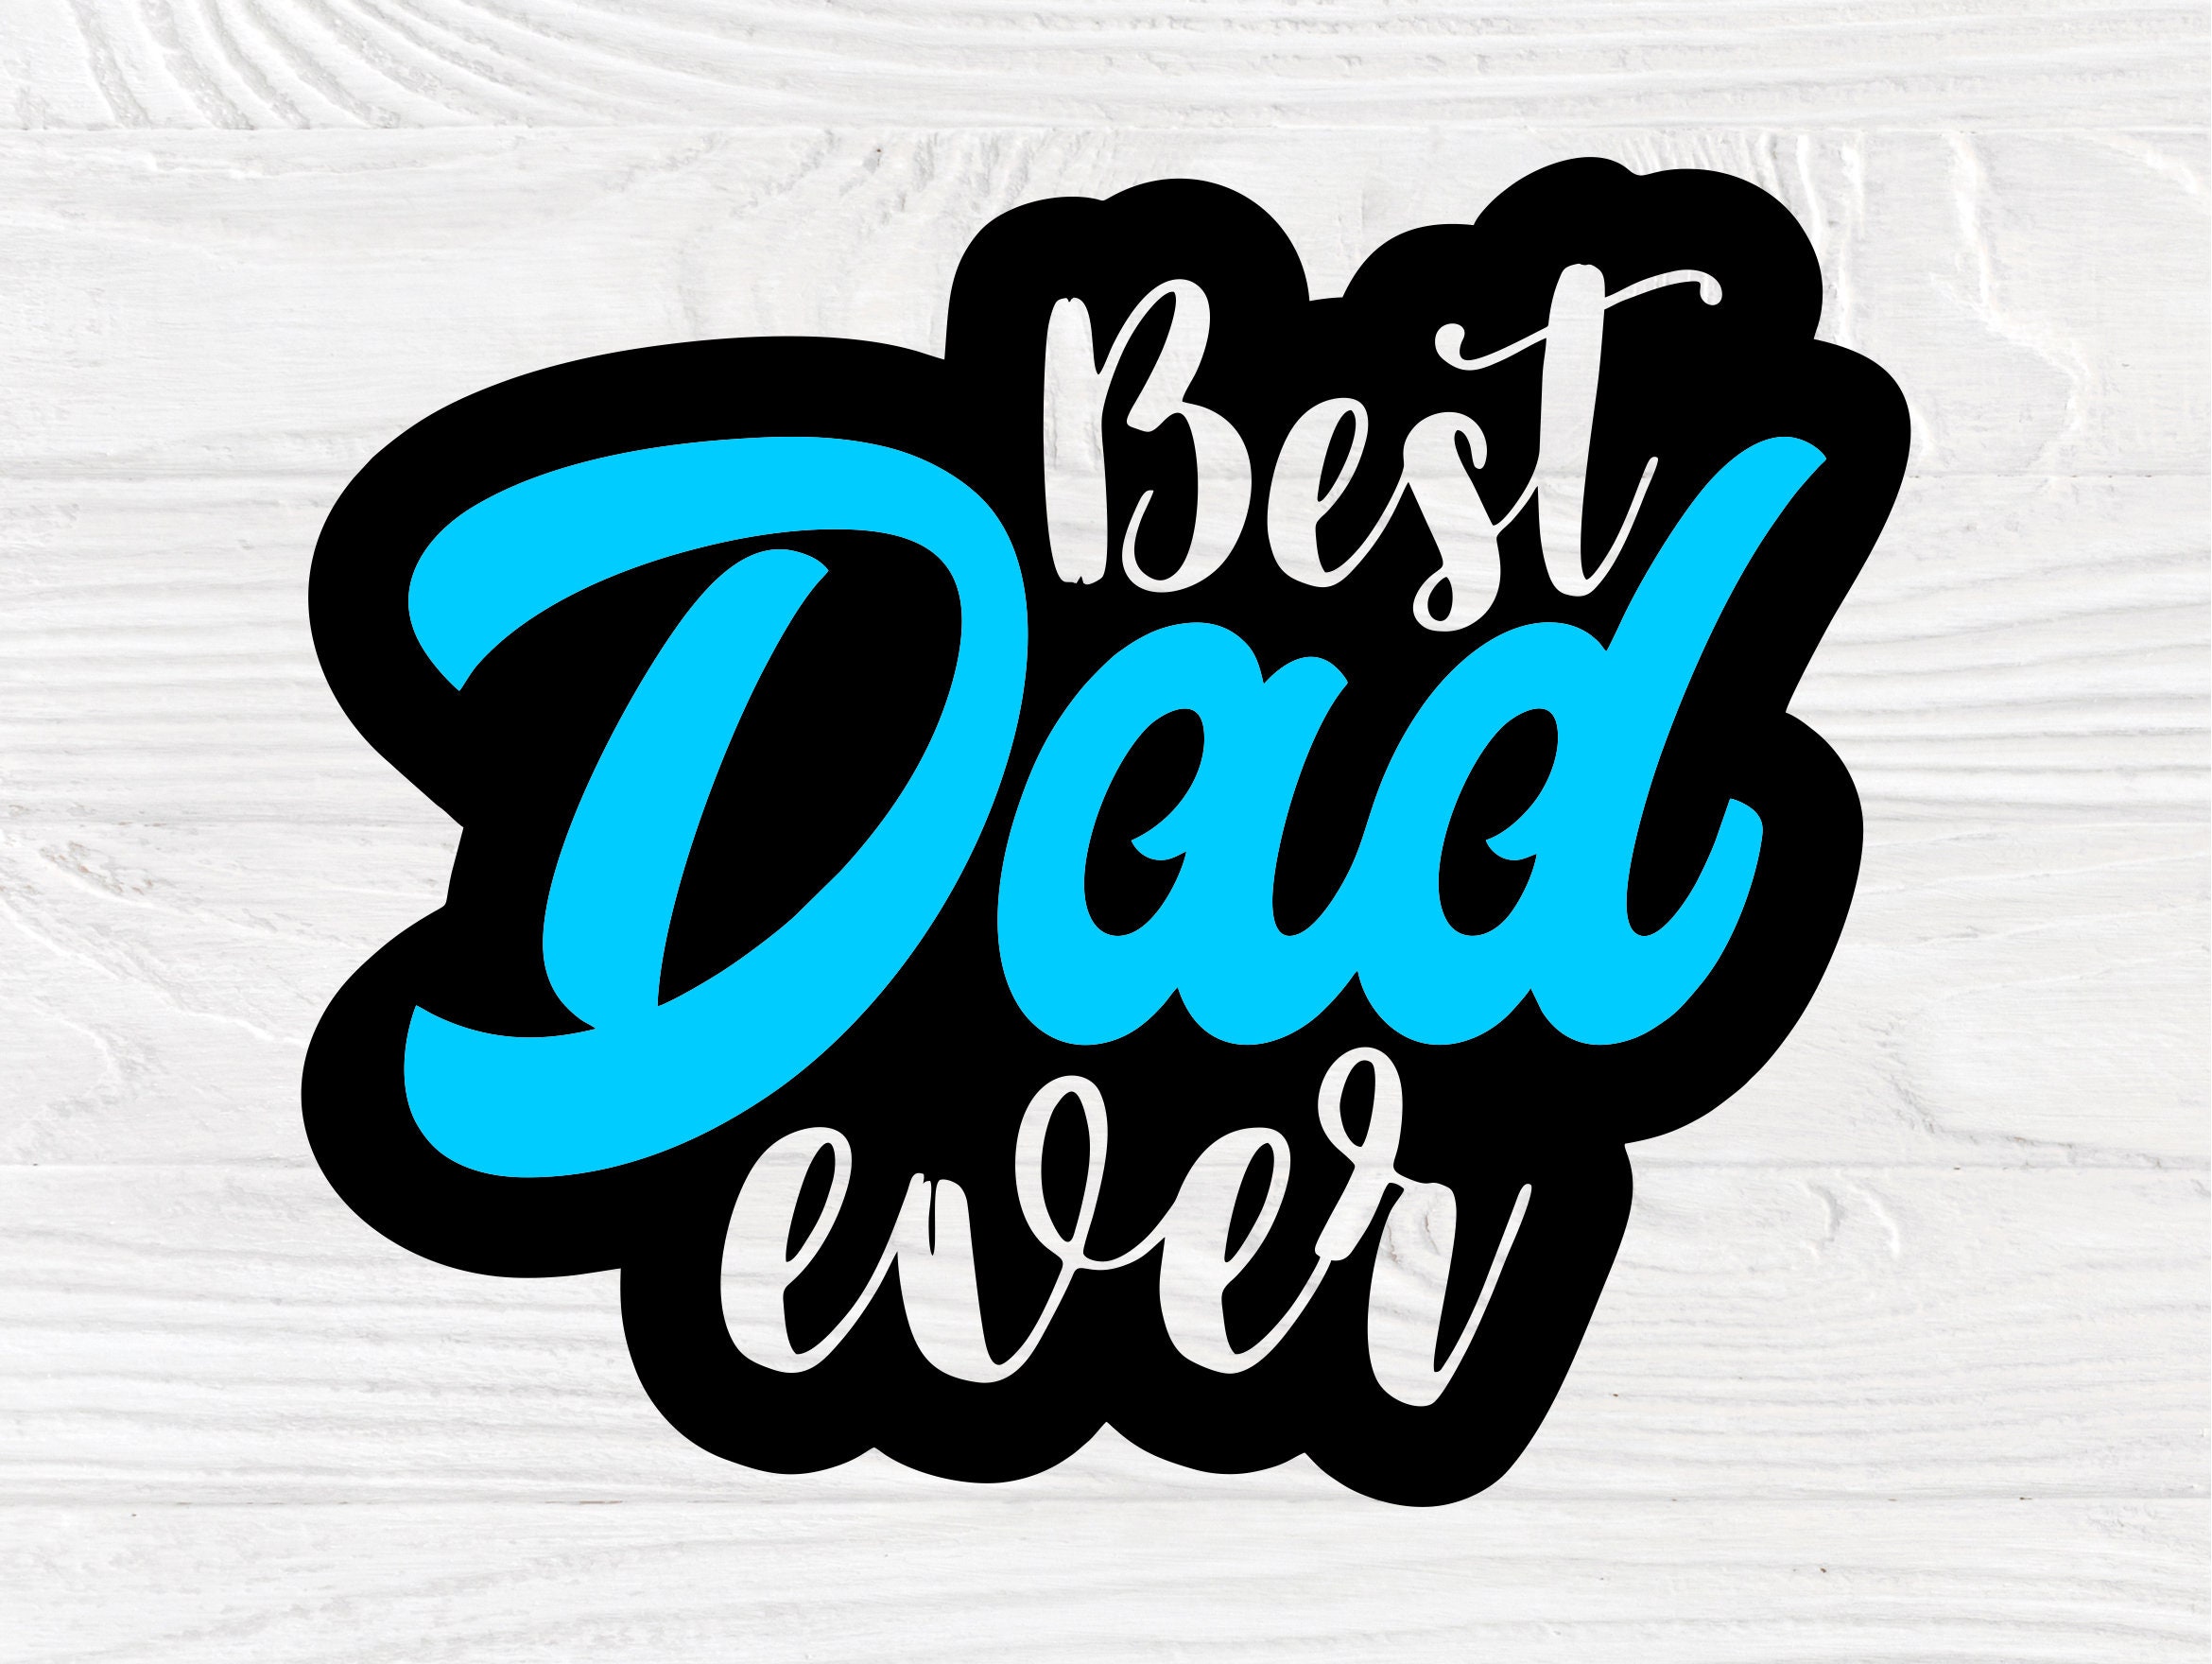 Best Dad Ever SVG, Fathers Day Svg, Svg Cut Files